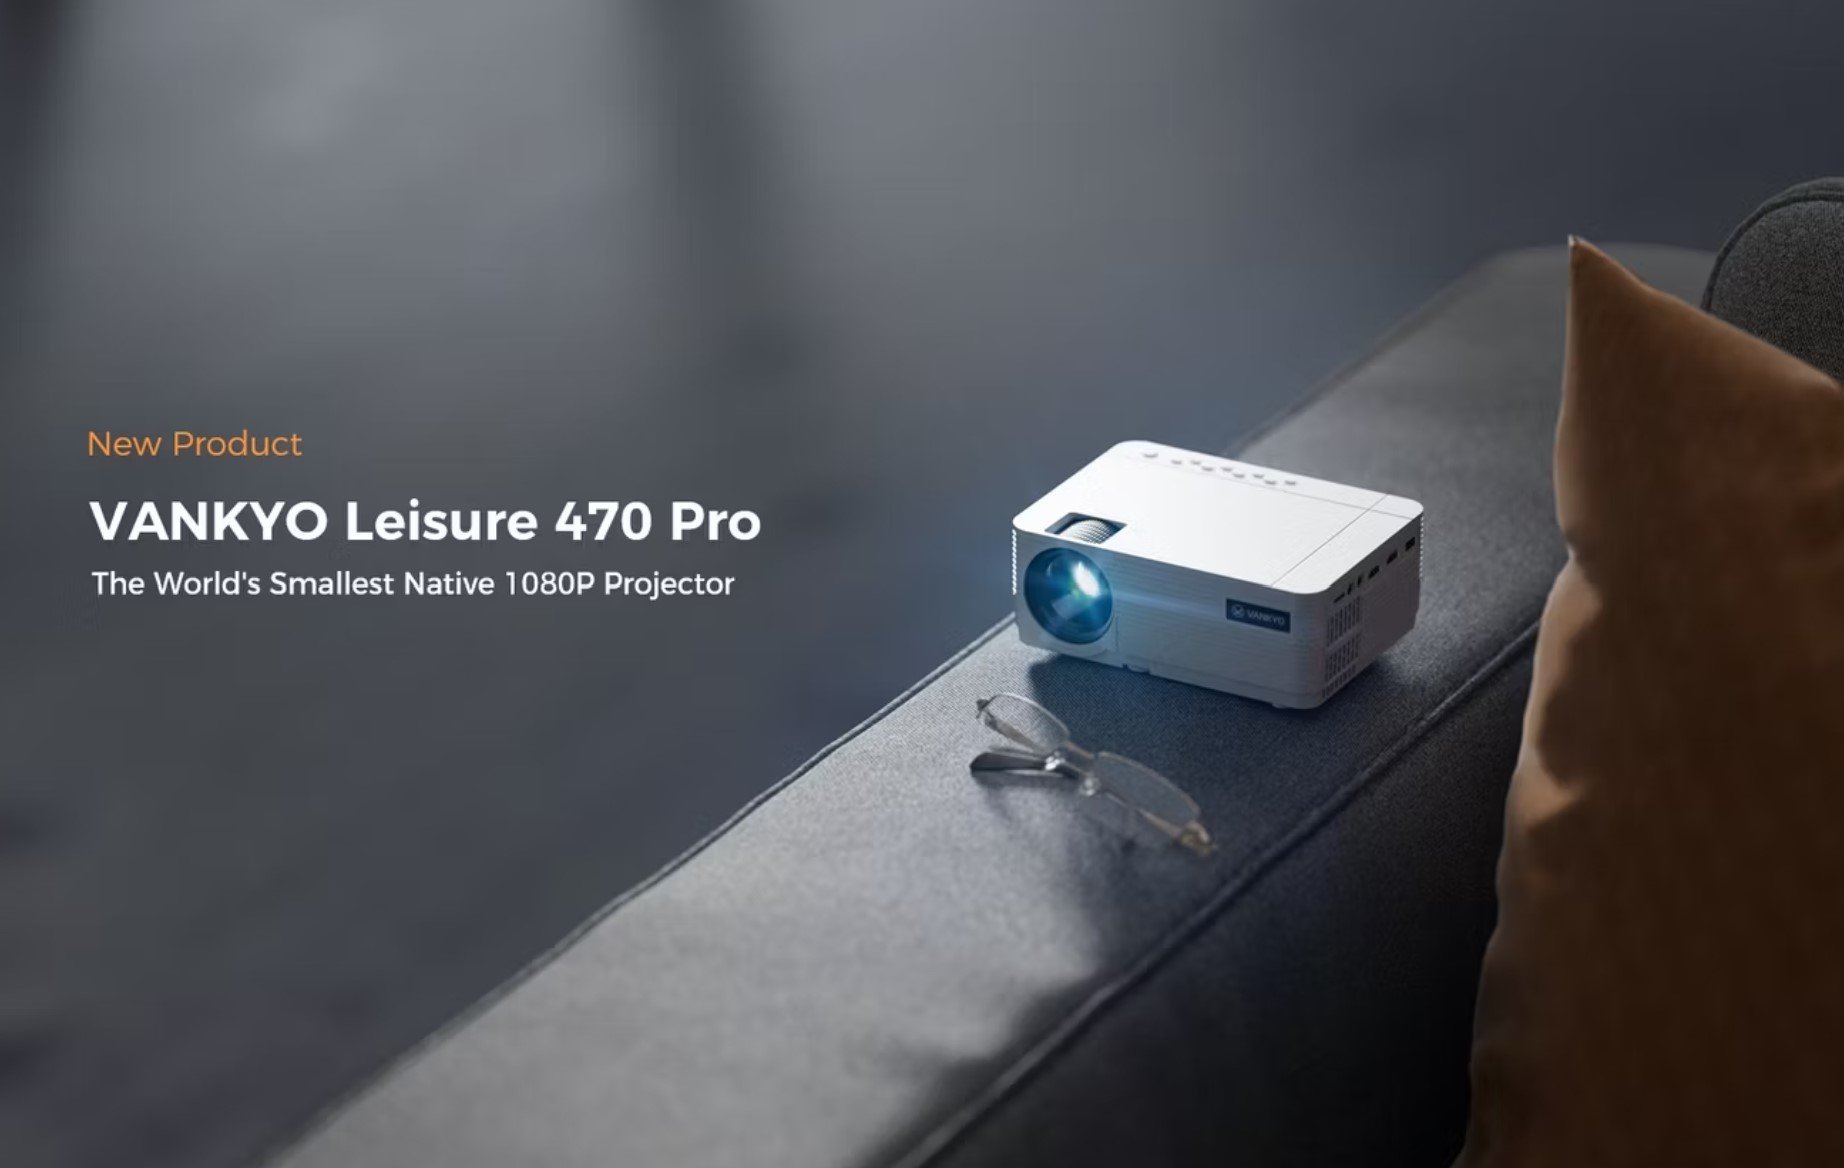 VANKYO Leisure 470 Pro compact and powerful projector released